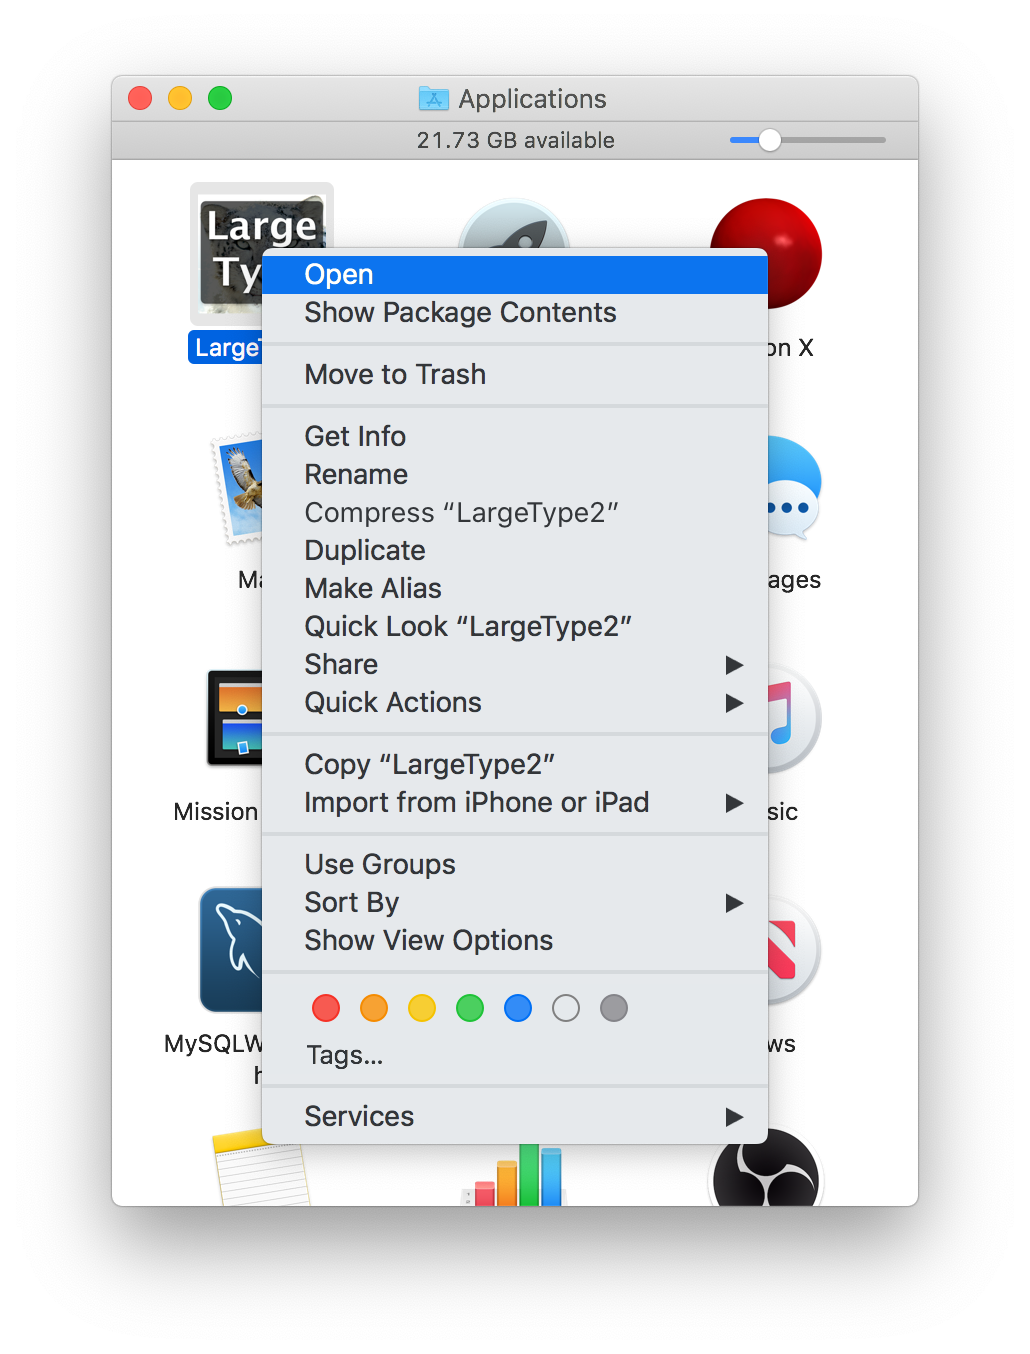 Working around the macOS security warning by selecting the LargeType2 application in Finder and choosing Open from the context menu.